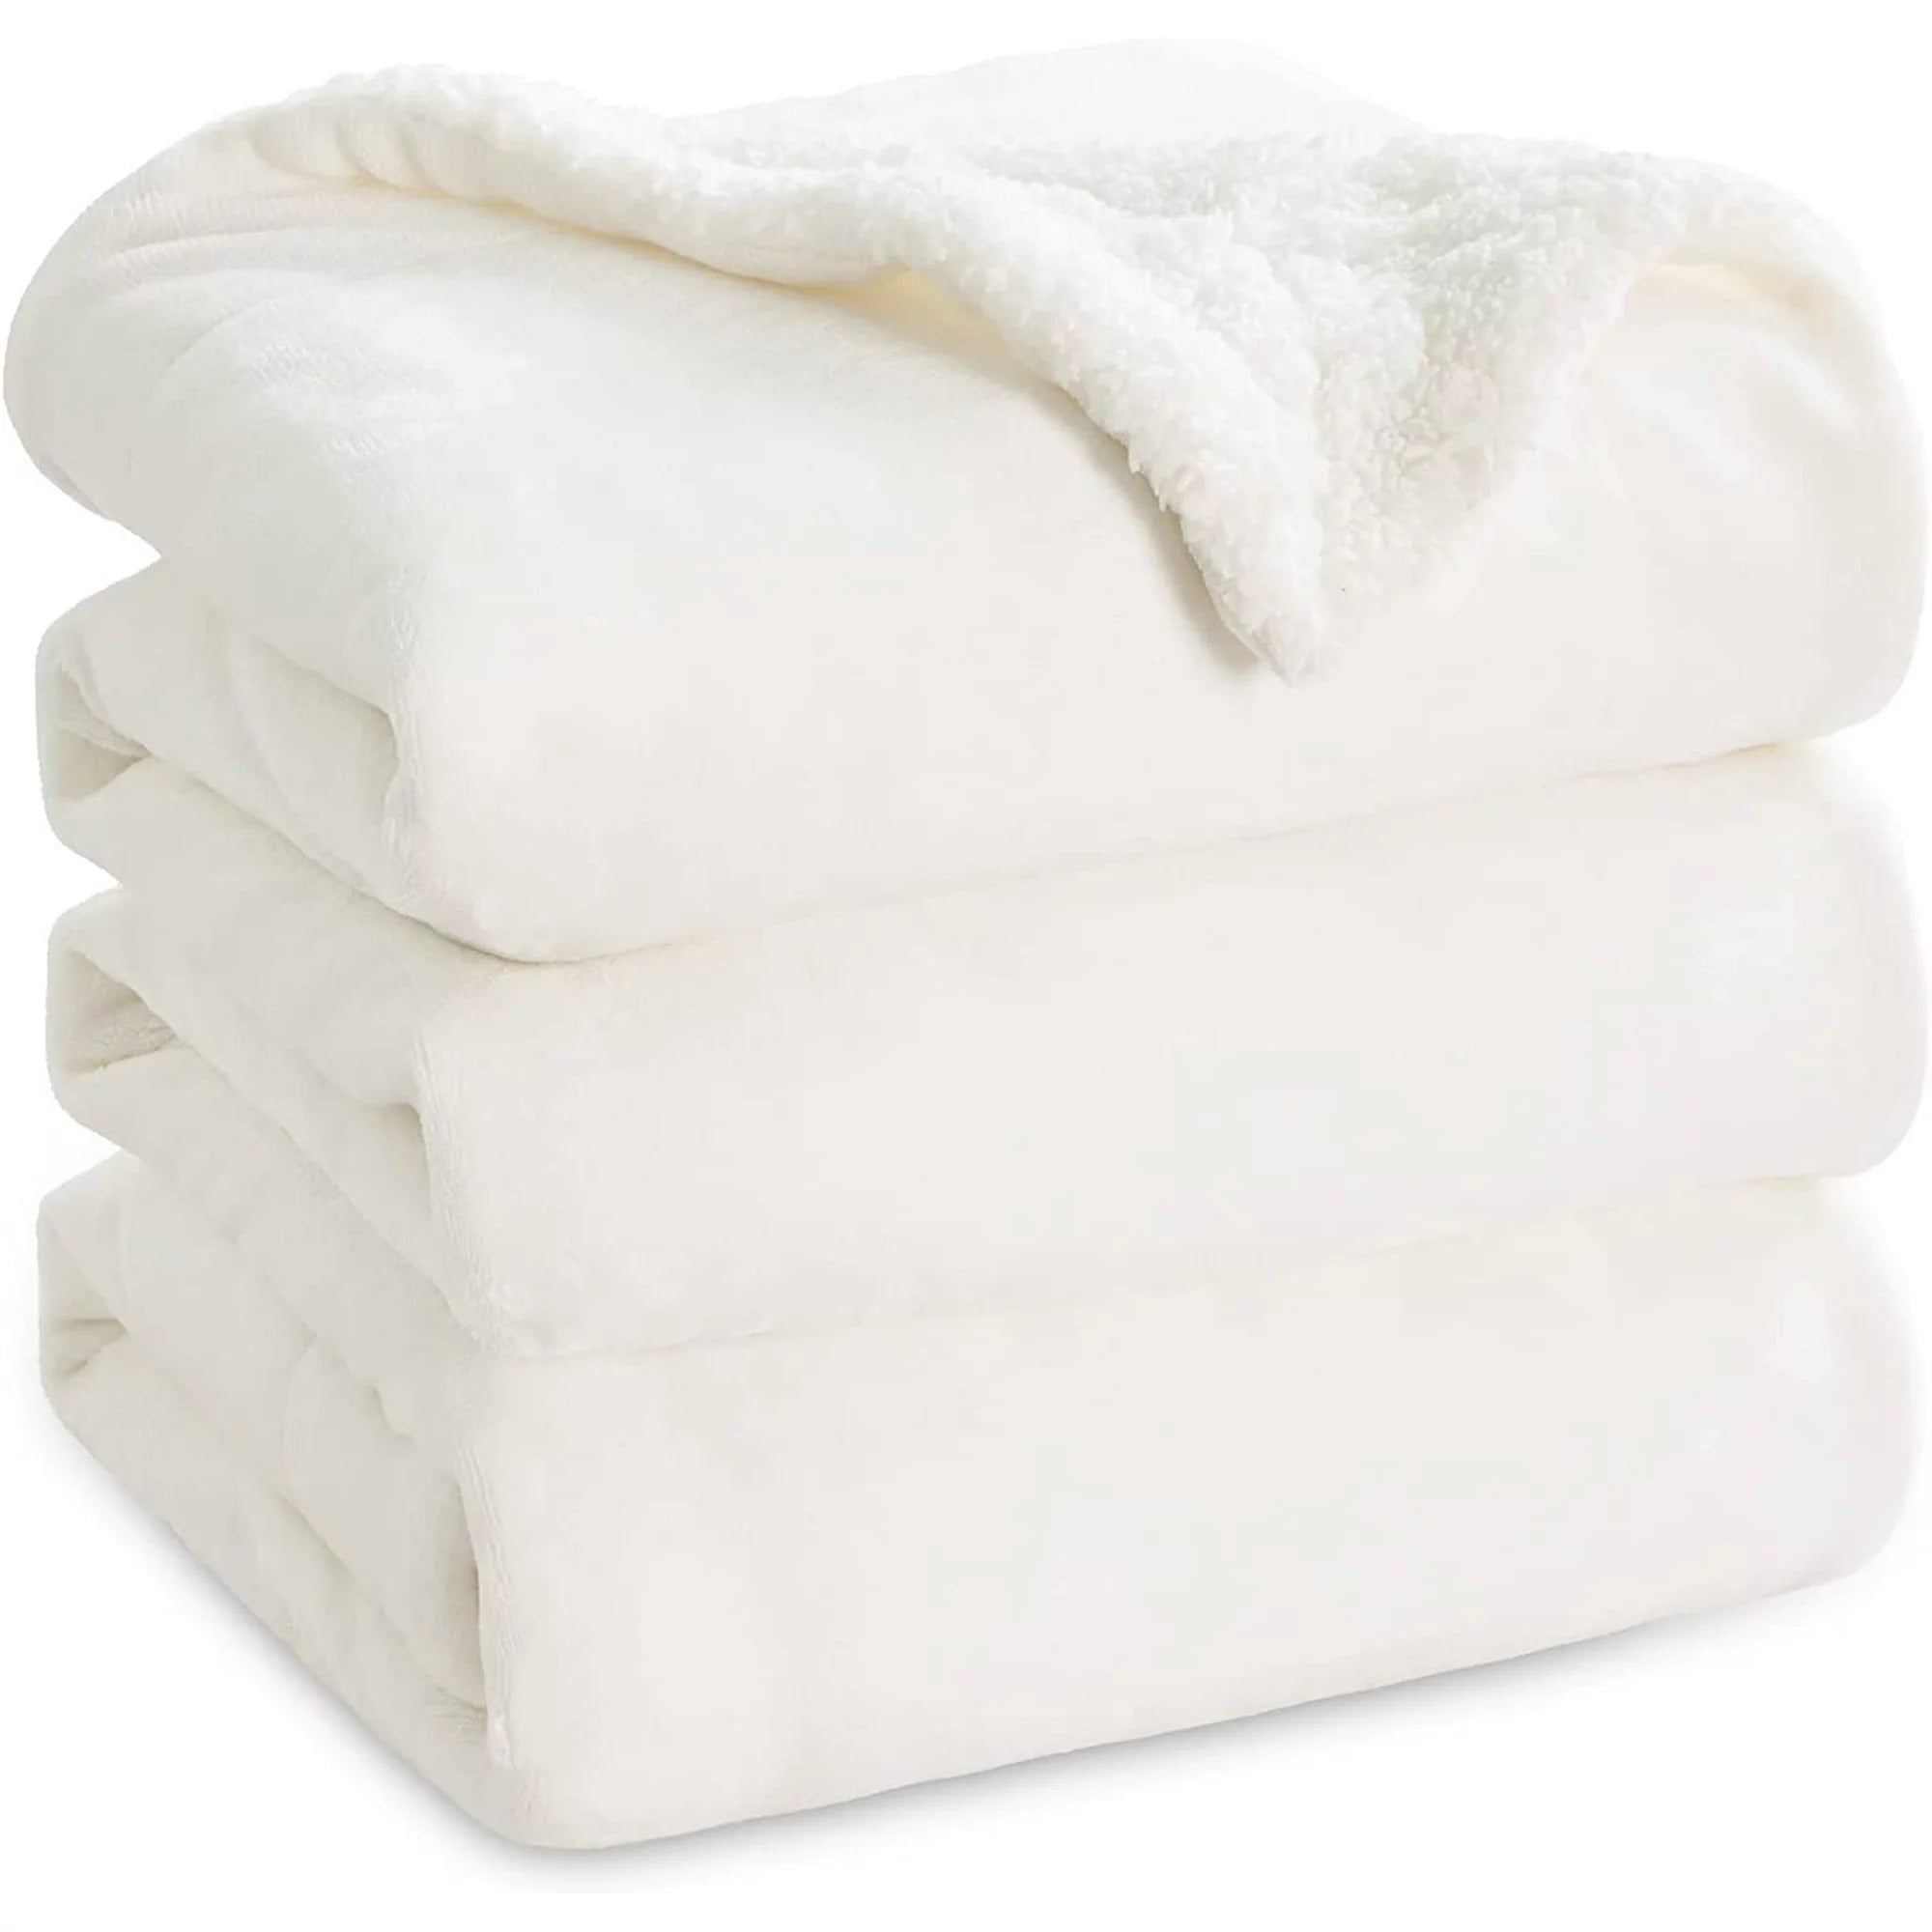 sherpa blanket, white blankets for bed and sofa,fleece throw sofa bed blankets, warm blankets, cozy warm fur blankets, soft sherpa blankets, blankets for all, universal blankets, winter blankets, summer blankets